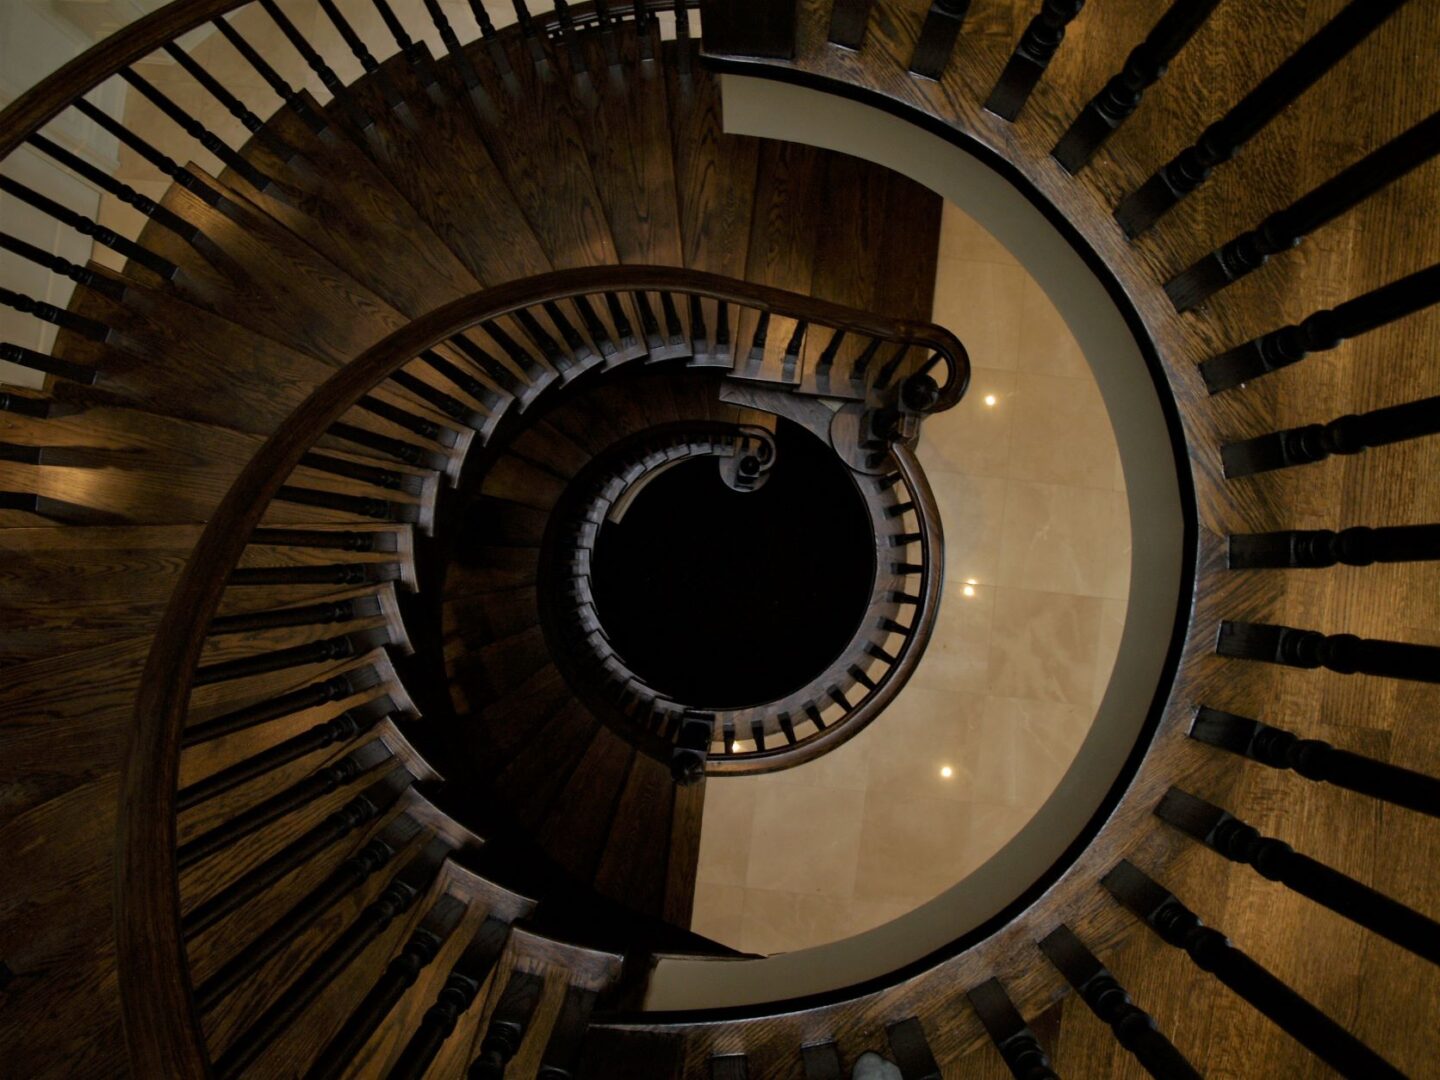 A Spiral Staircase Shot From the Top